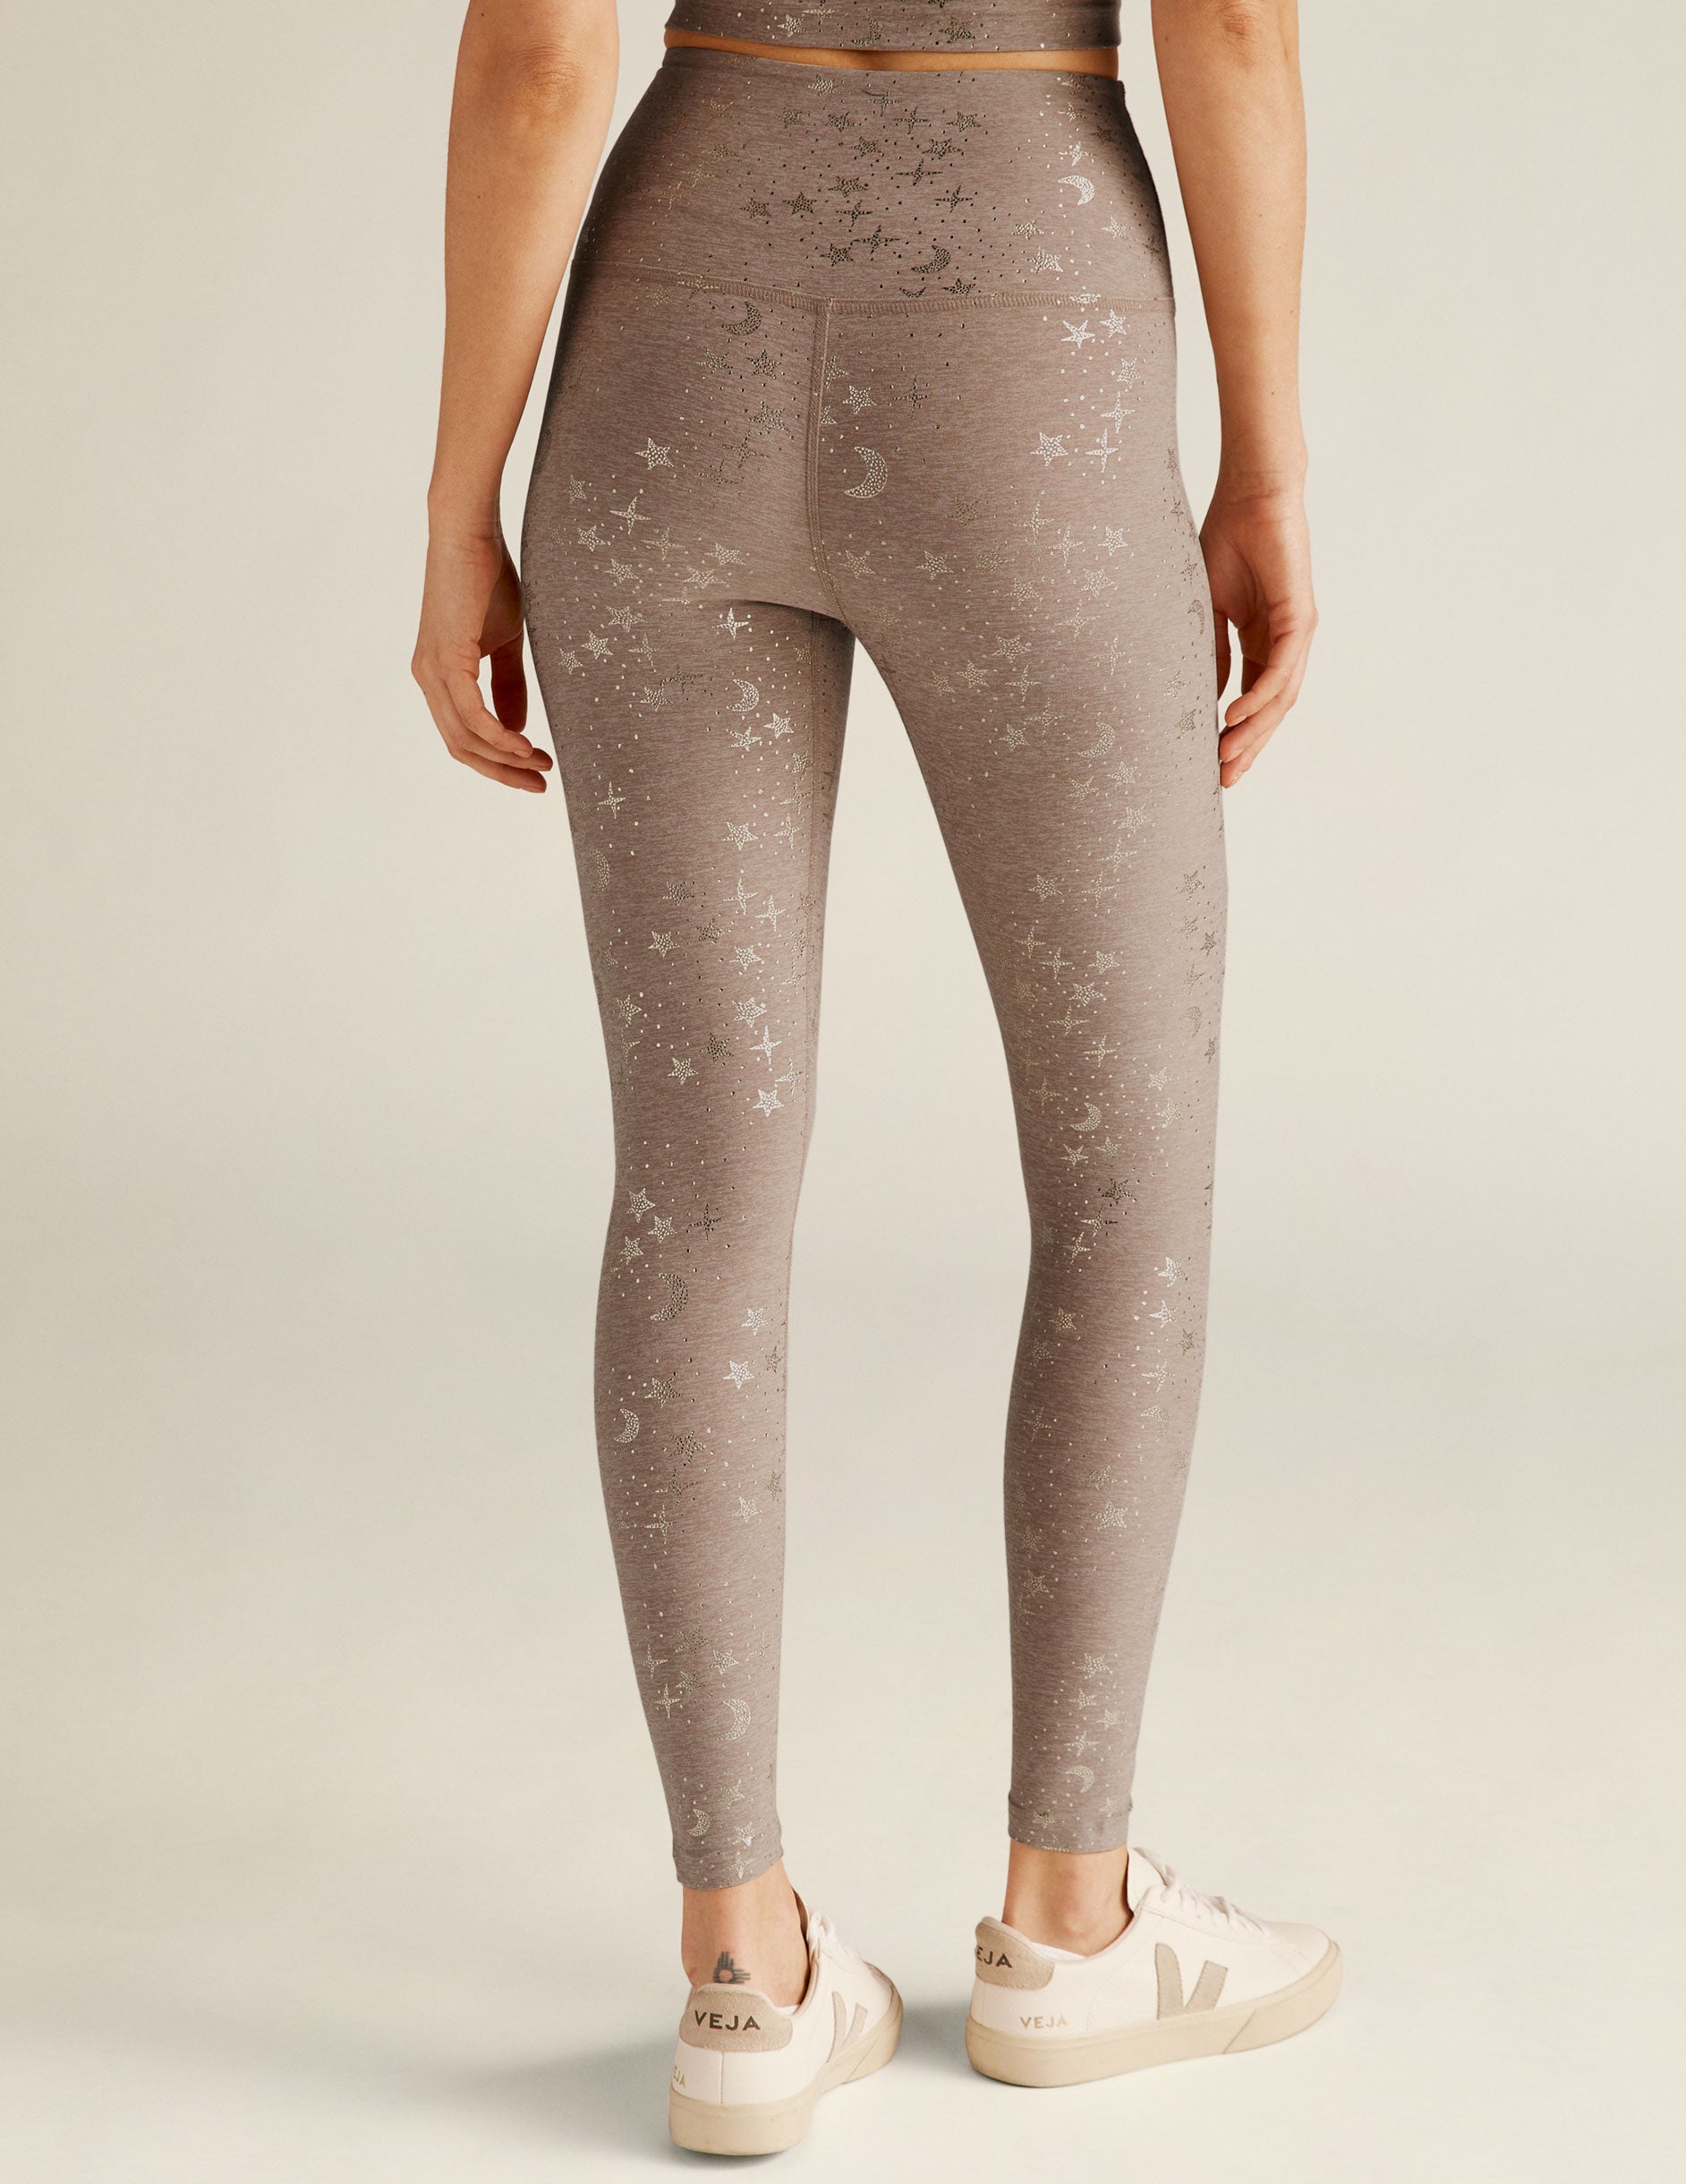 Beyond Yoga Alloy Ombre Metallic High-Rise Leggings Small Women's Black  Gold - $42 - From Meagan